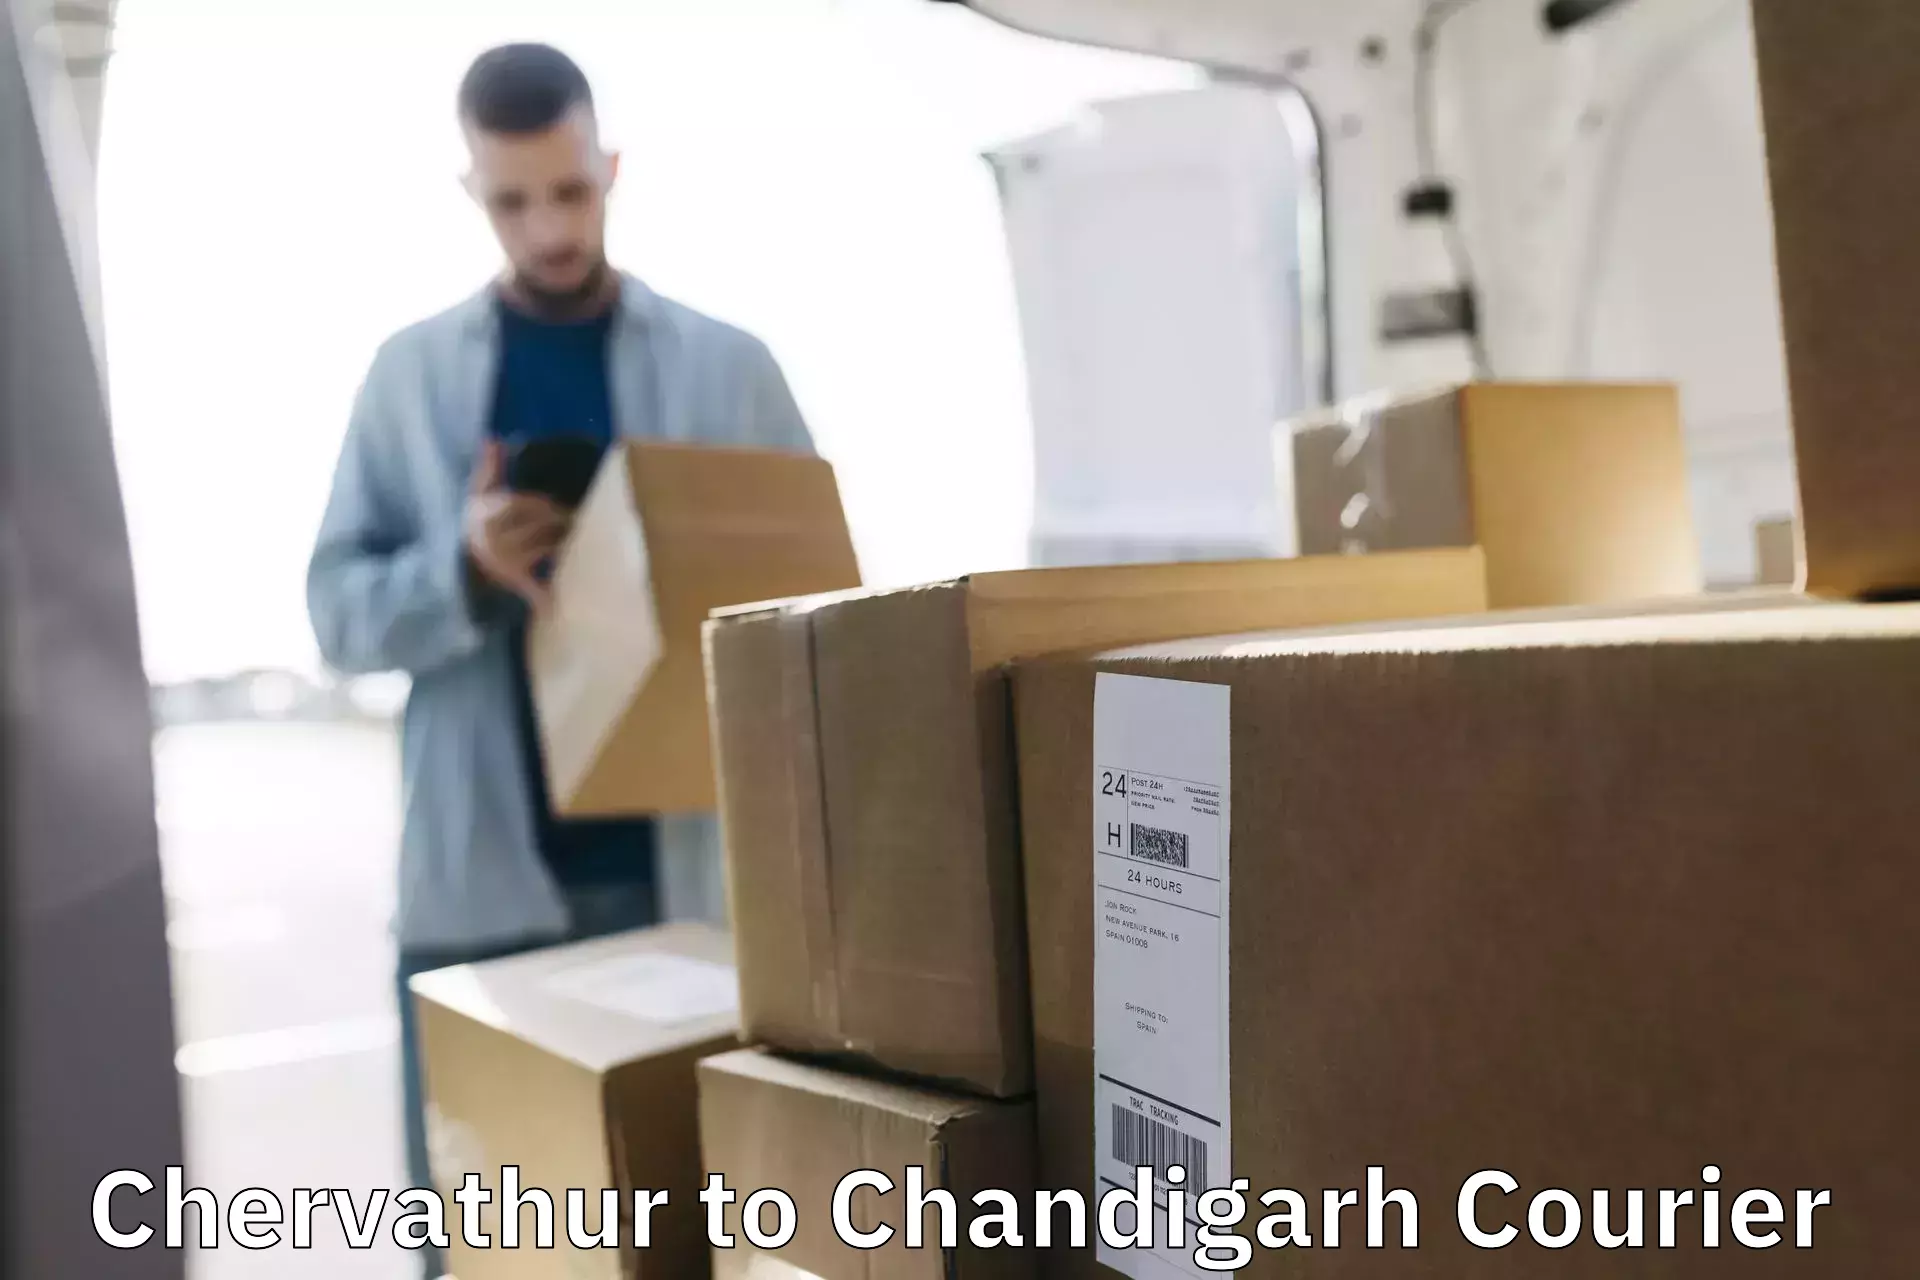 Affordable parcel service Chervathur to Chandigarh